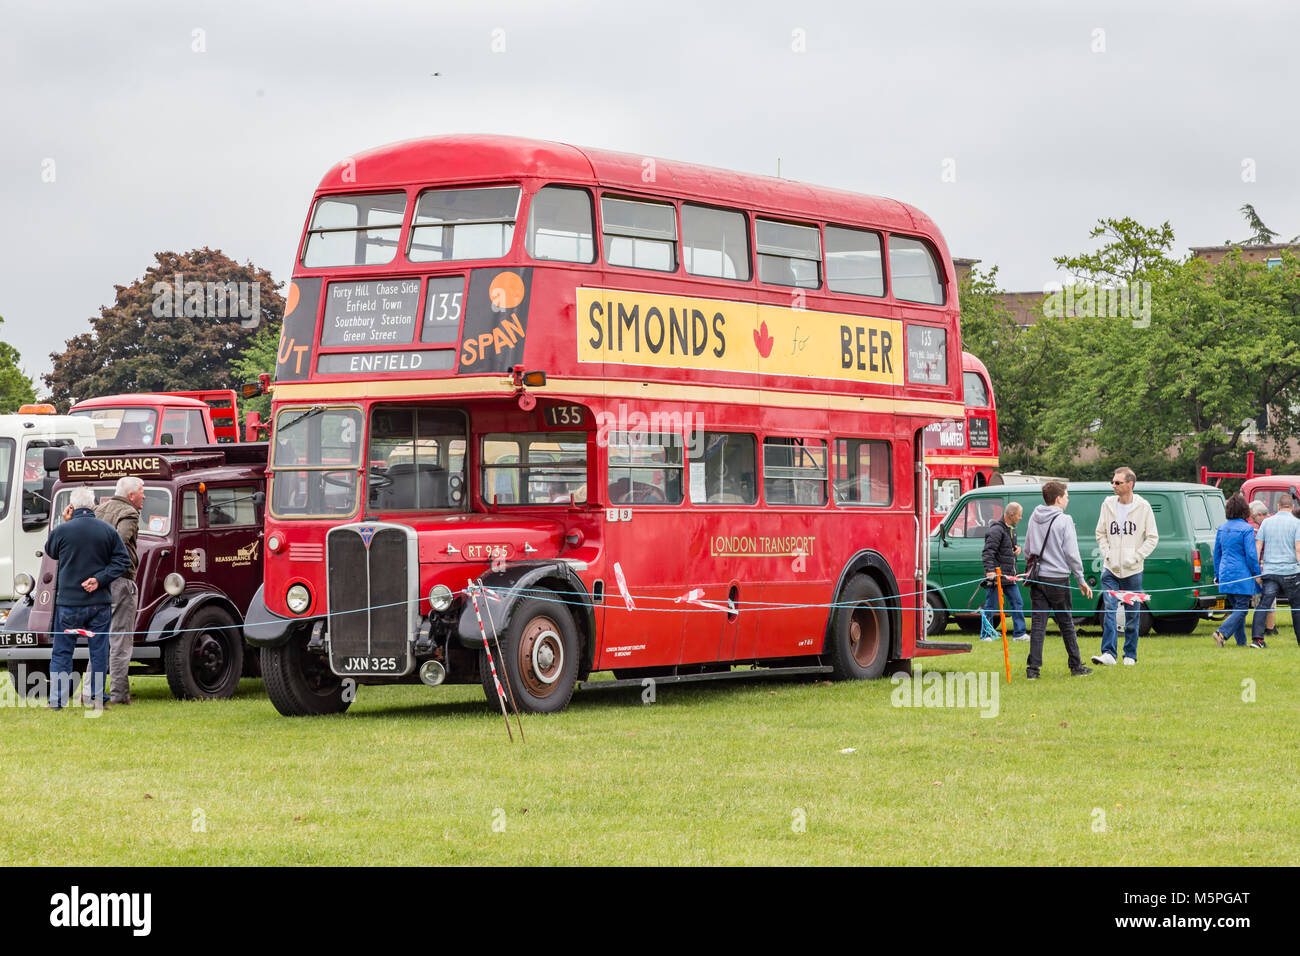 Enfield, London, UK - May 25 2014: Red London routemaster bus standing in a field on display. Stock Photo